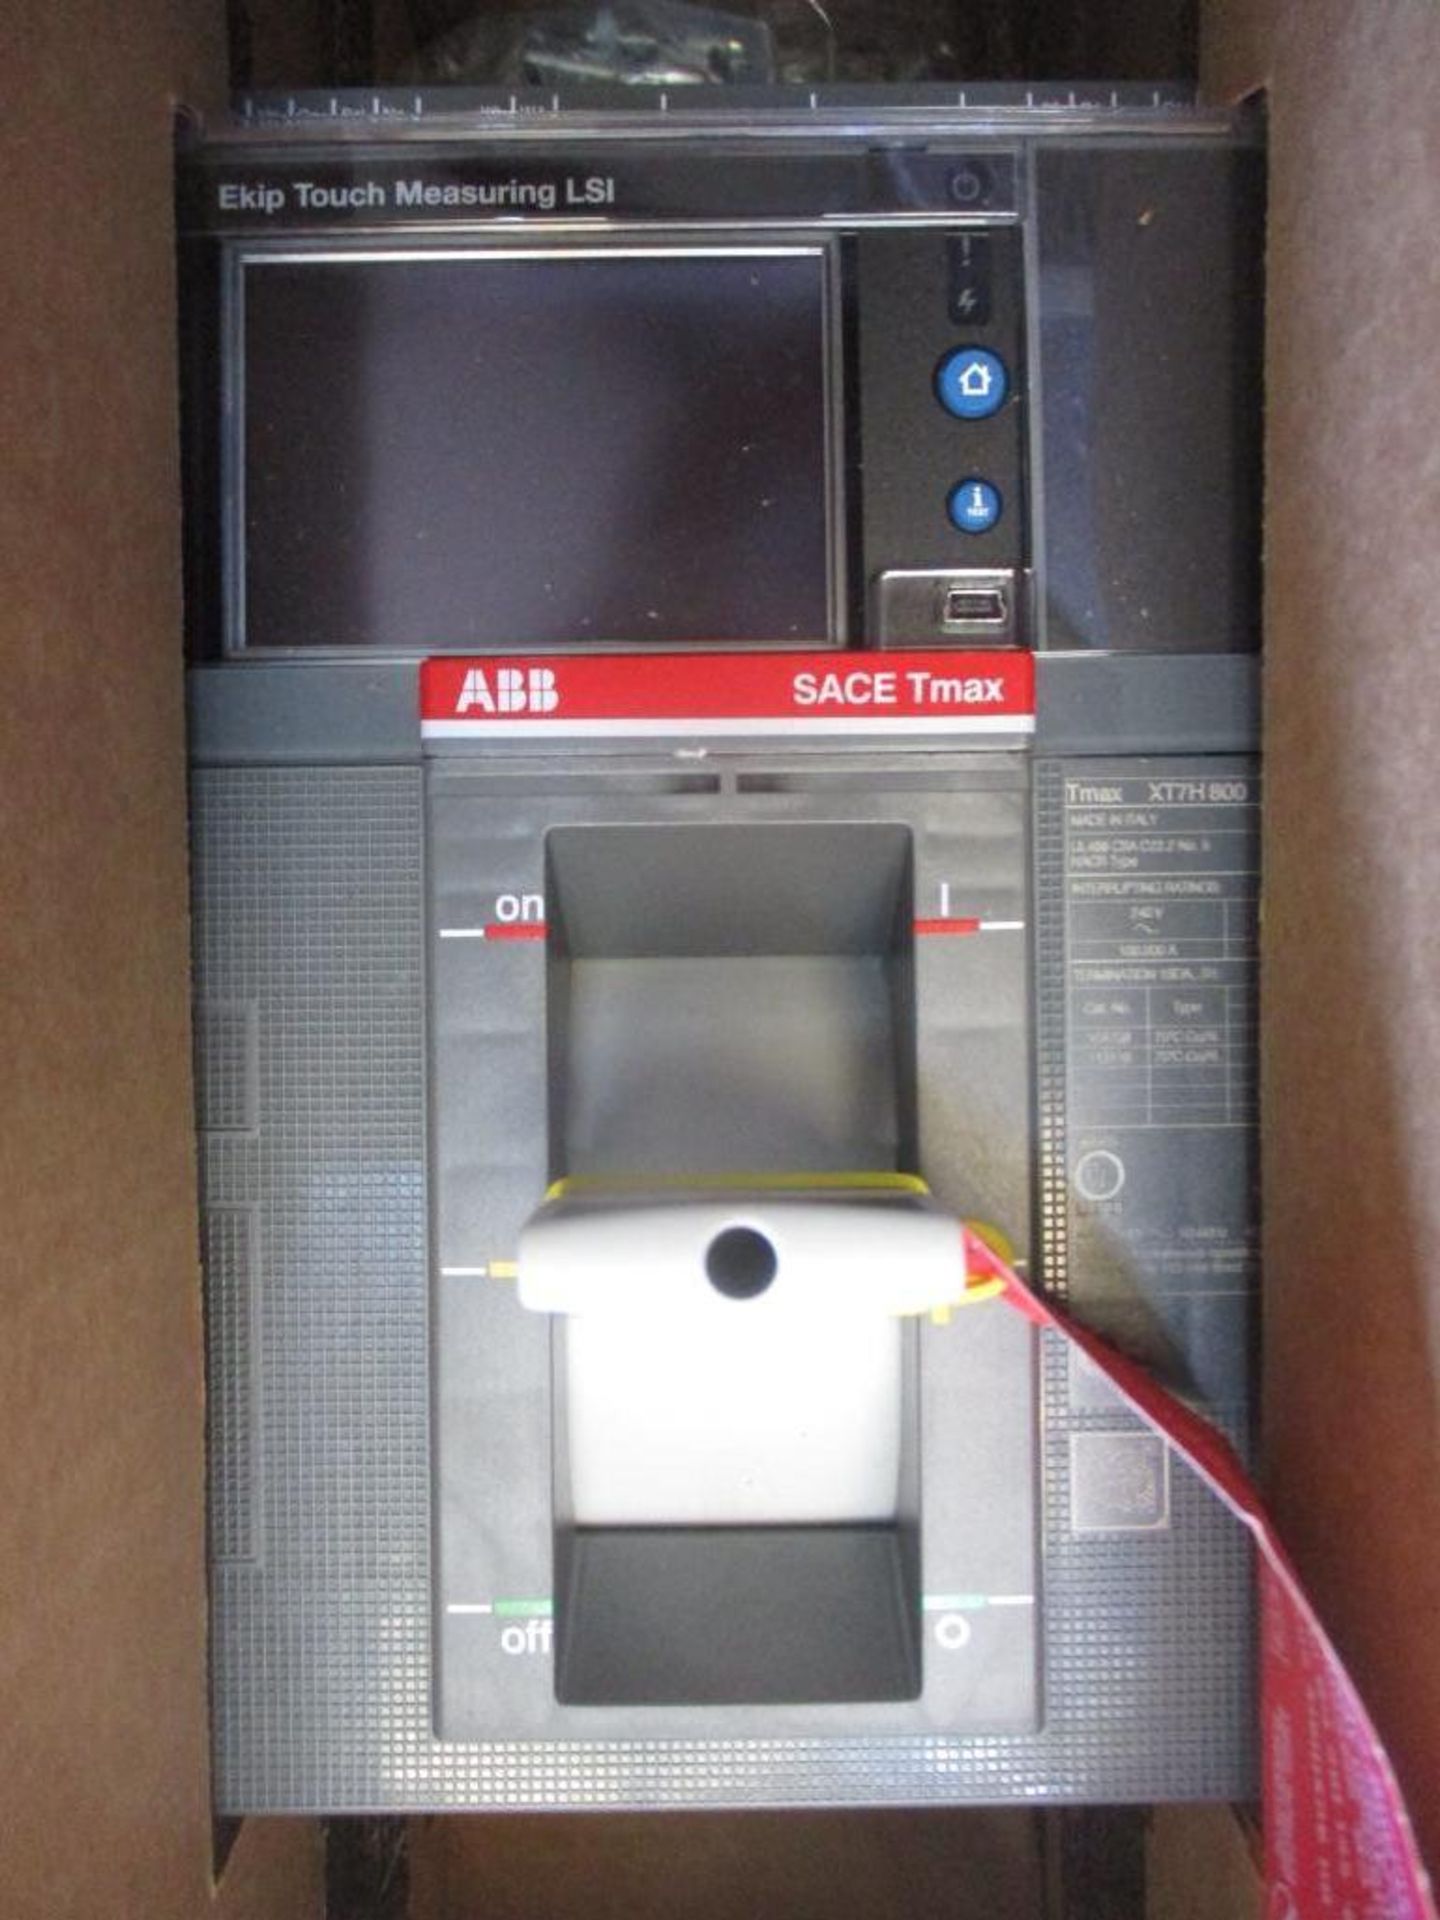 ABB 800 AMP Circuit Breaker, SACE TMAX XT7 H 800, EKIP Touch Measuring LSI 3-Pole (New in Box) - Image 2 of 4